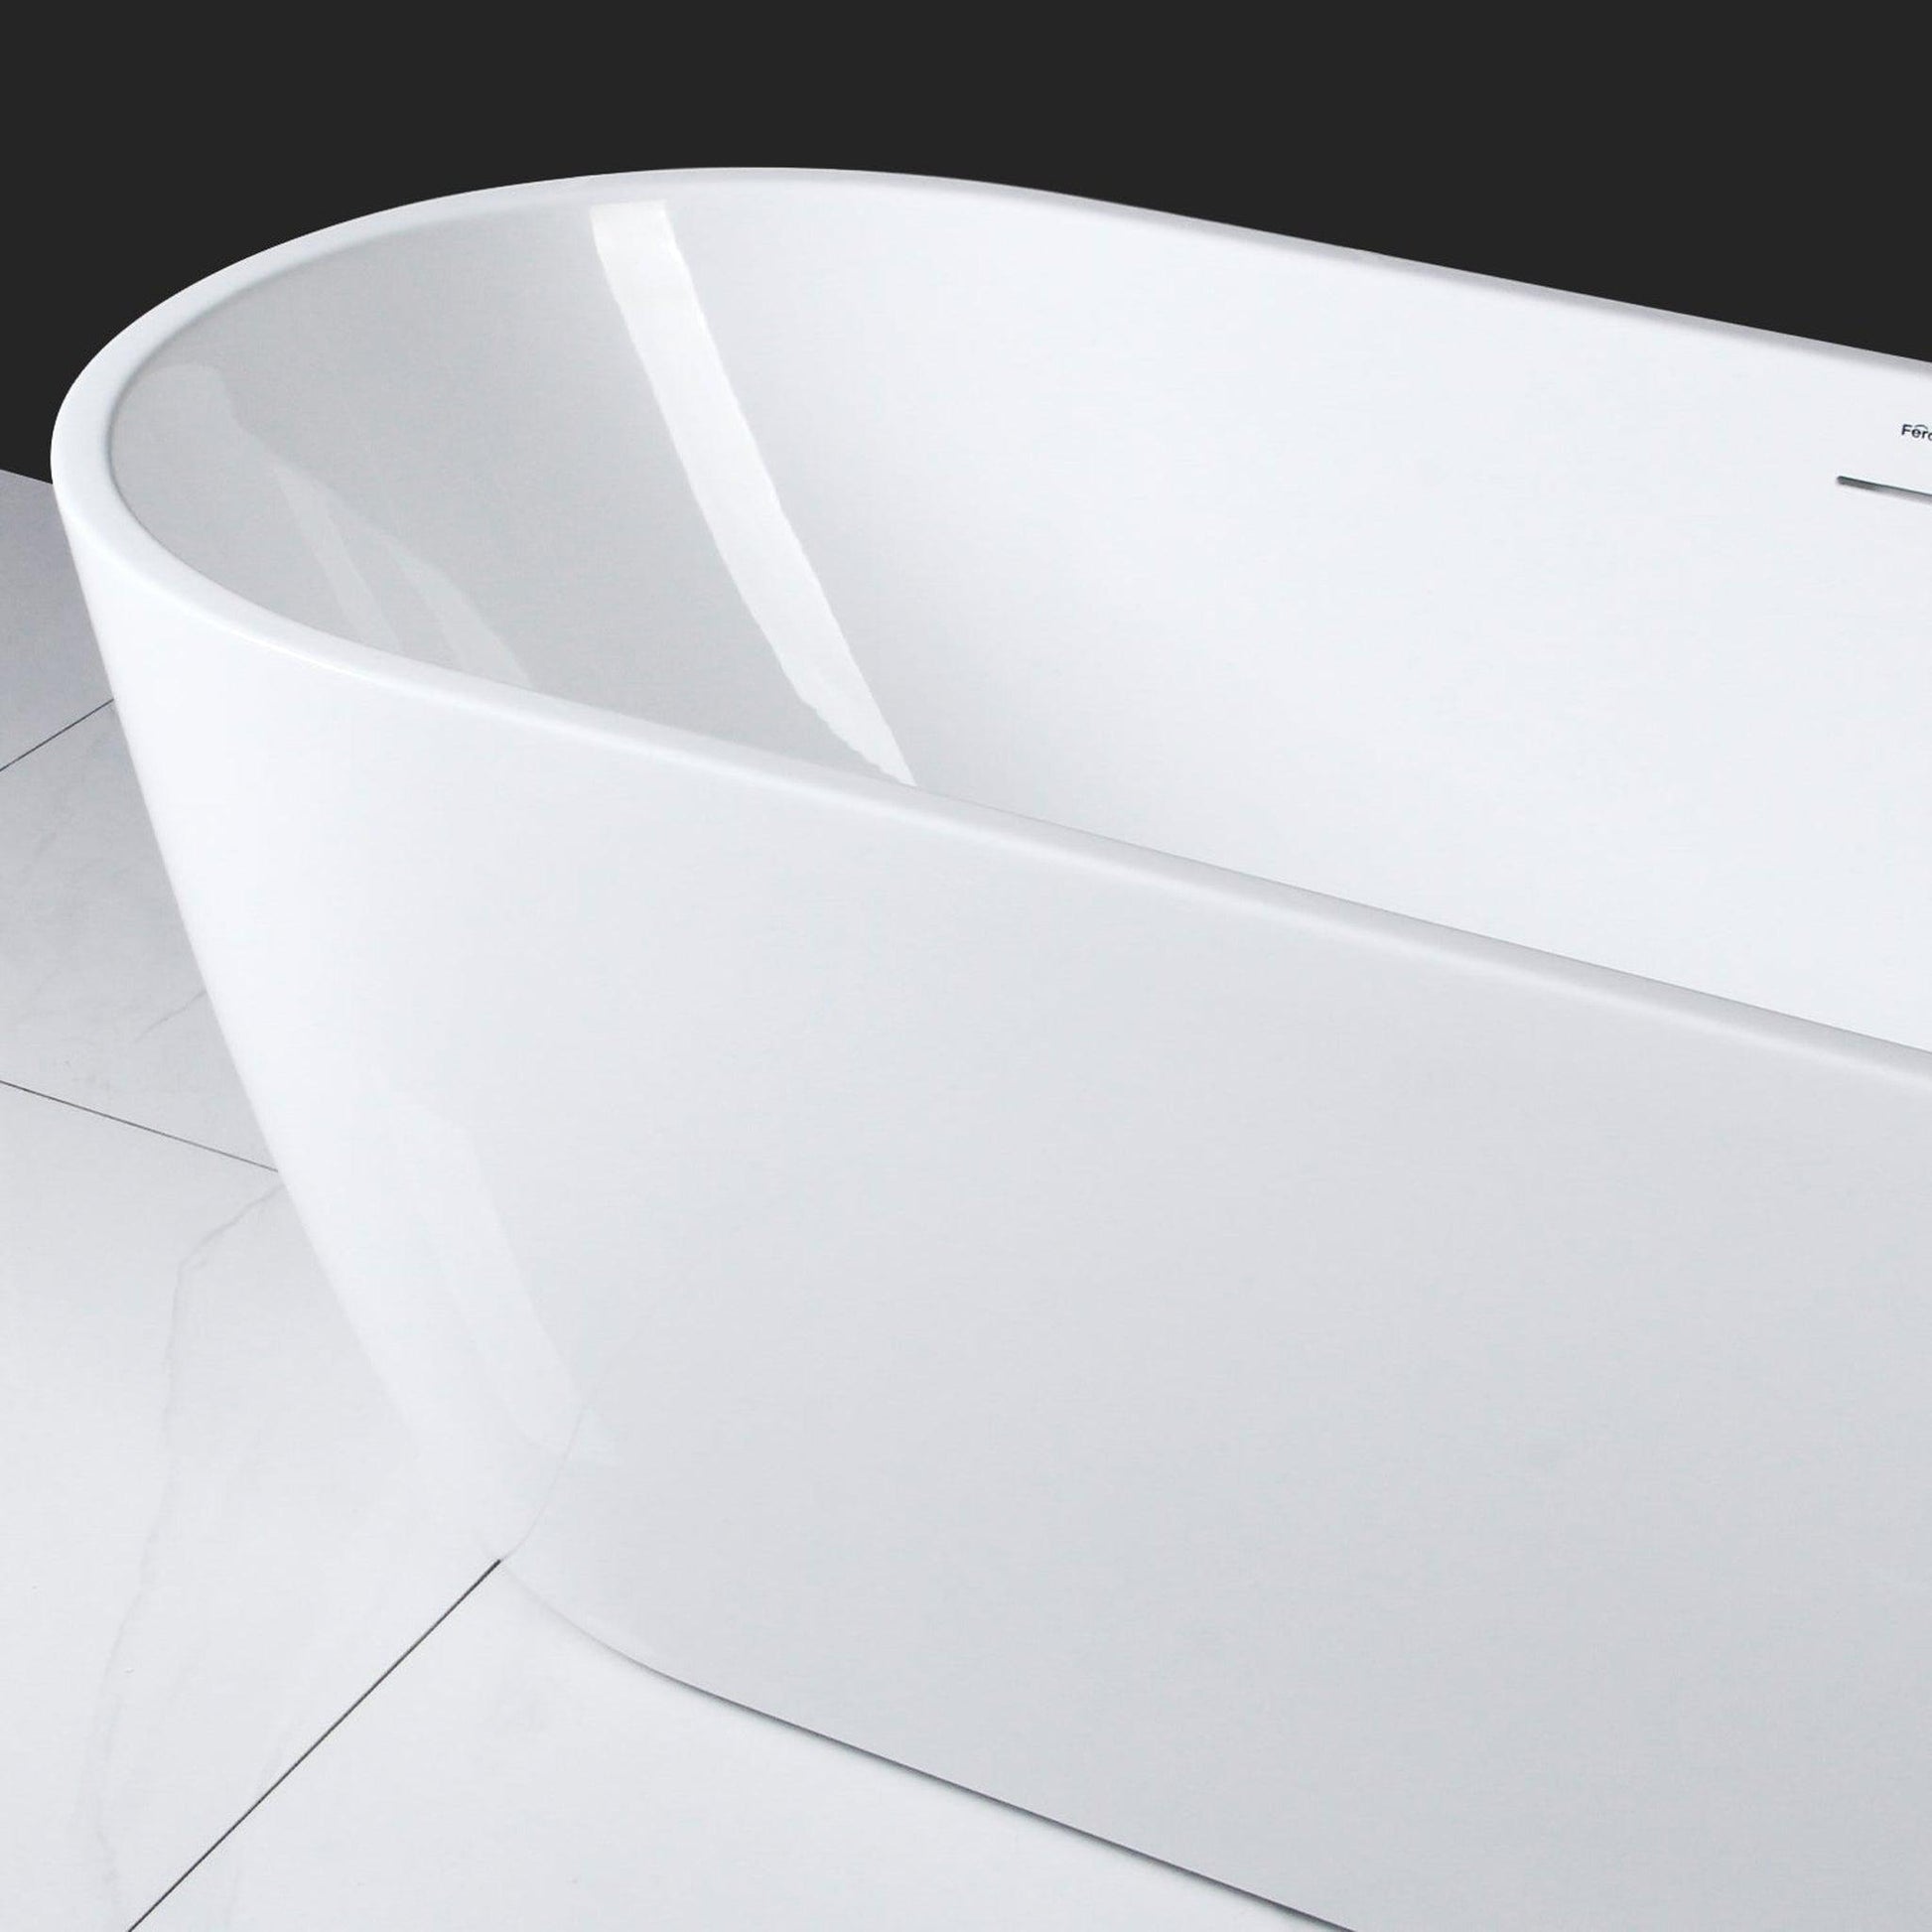 FerdY Bali 67" x 30" Oval Glossy White Acrylic Freestanding Roll Top Soaking Bathtub With Brushed Nickel Drain and Overflow